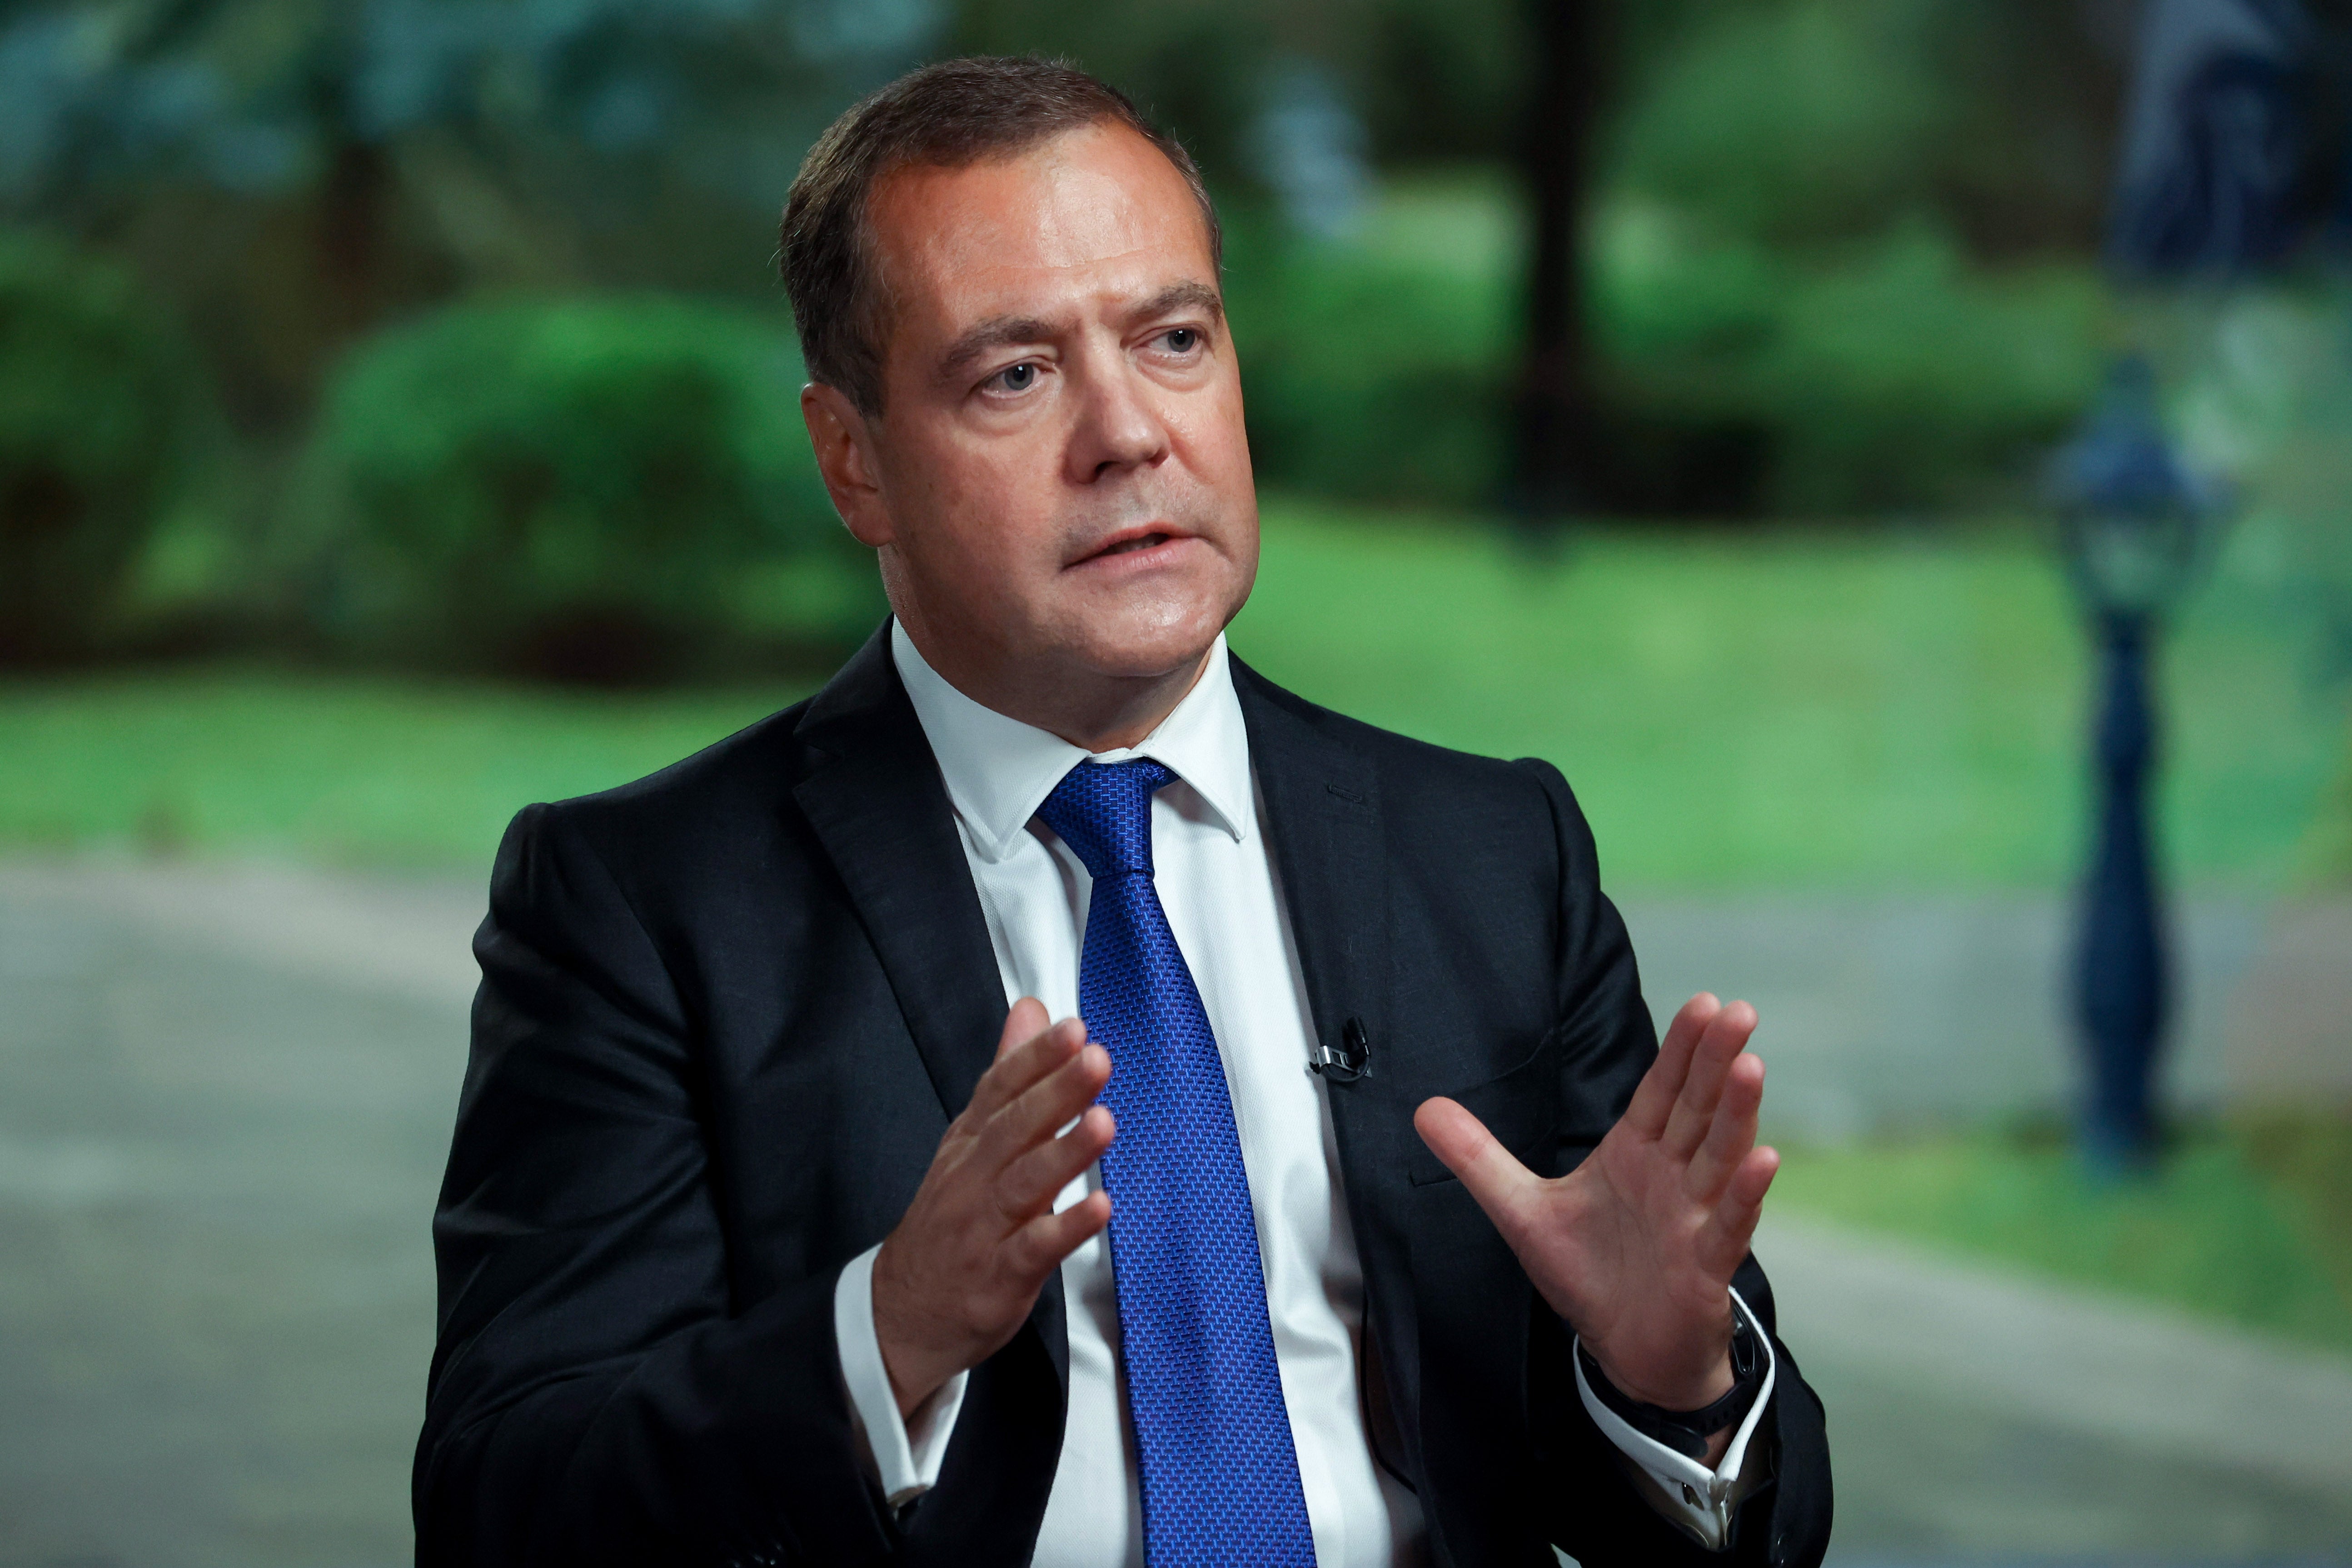 Russian Security Council deputy chief Medvedev accused Twitter, among others, of meddling